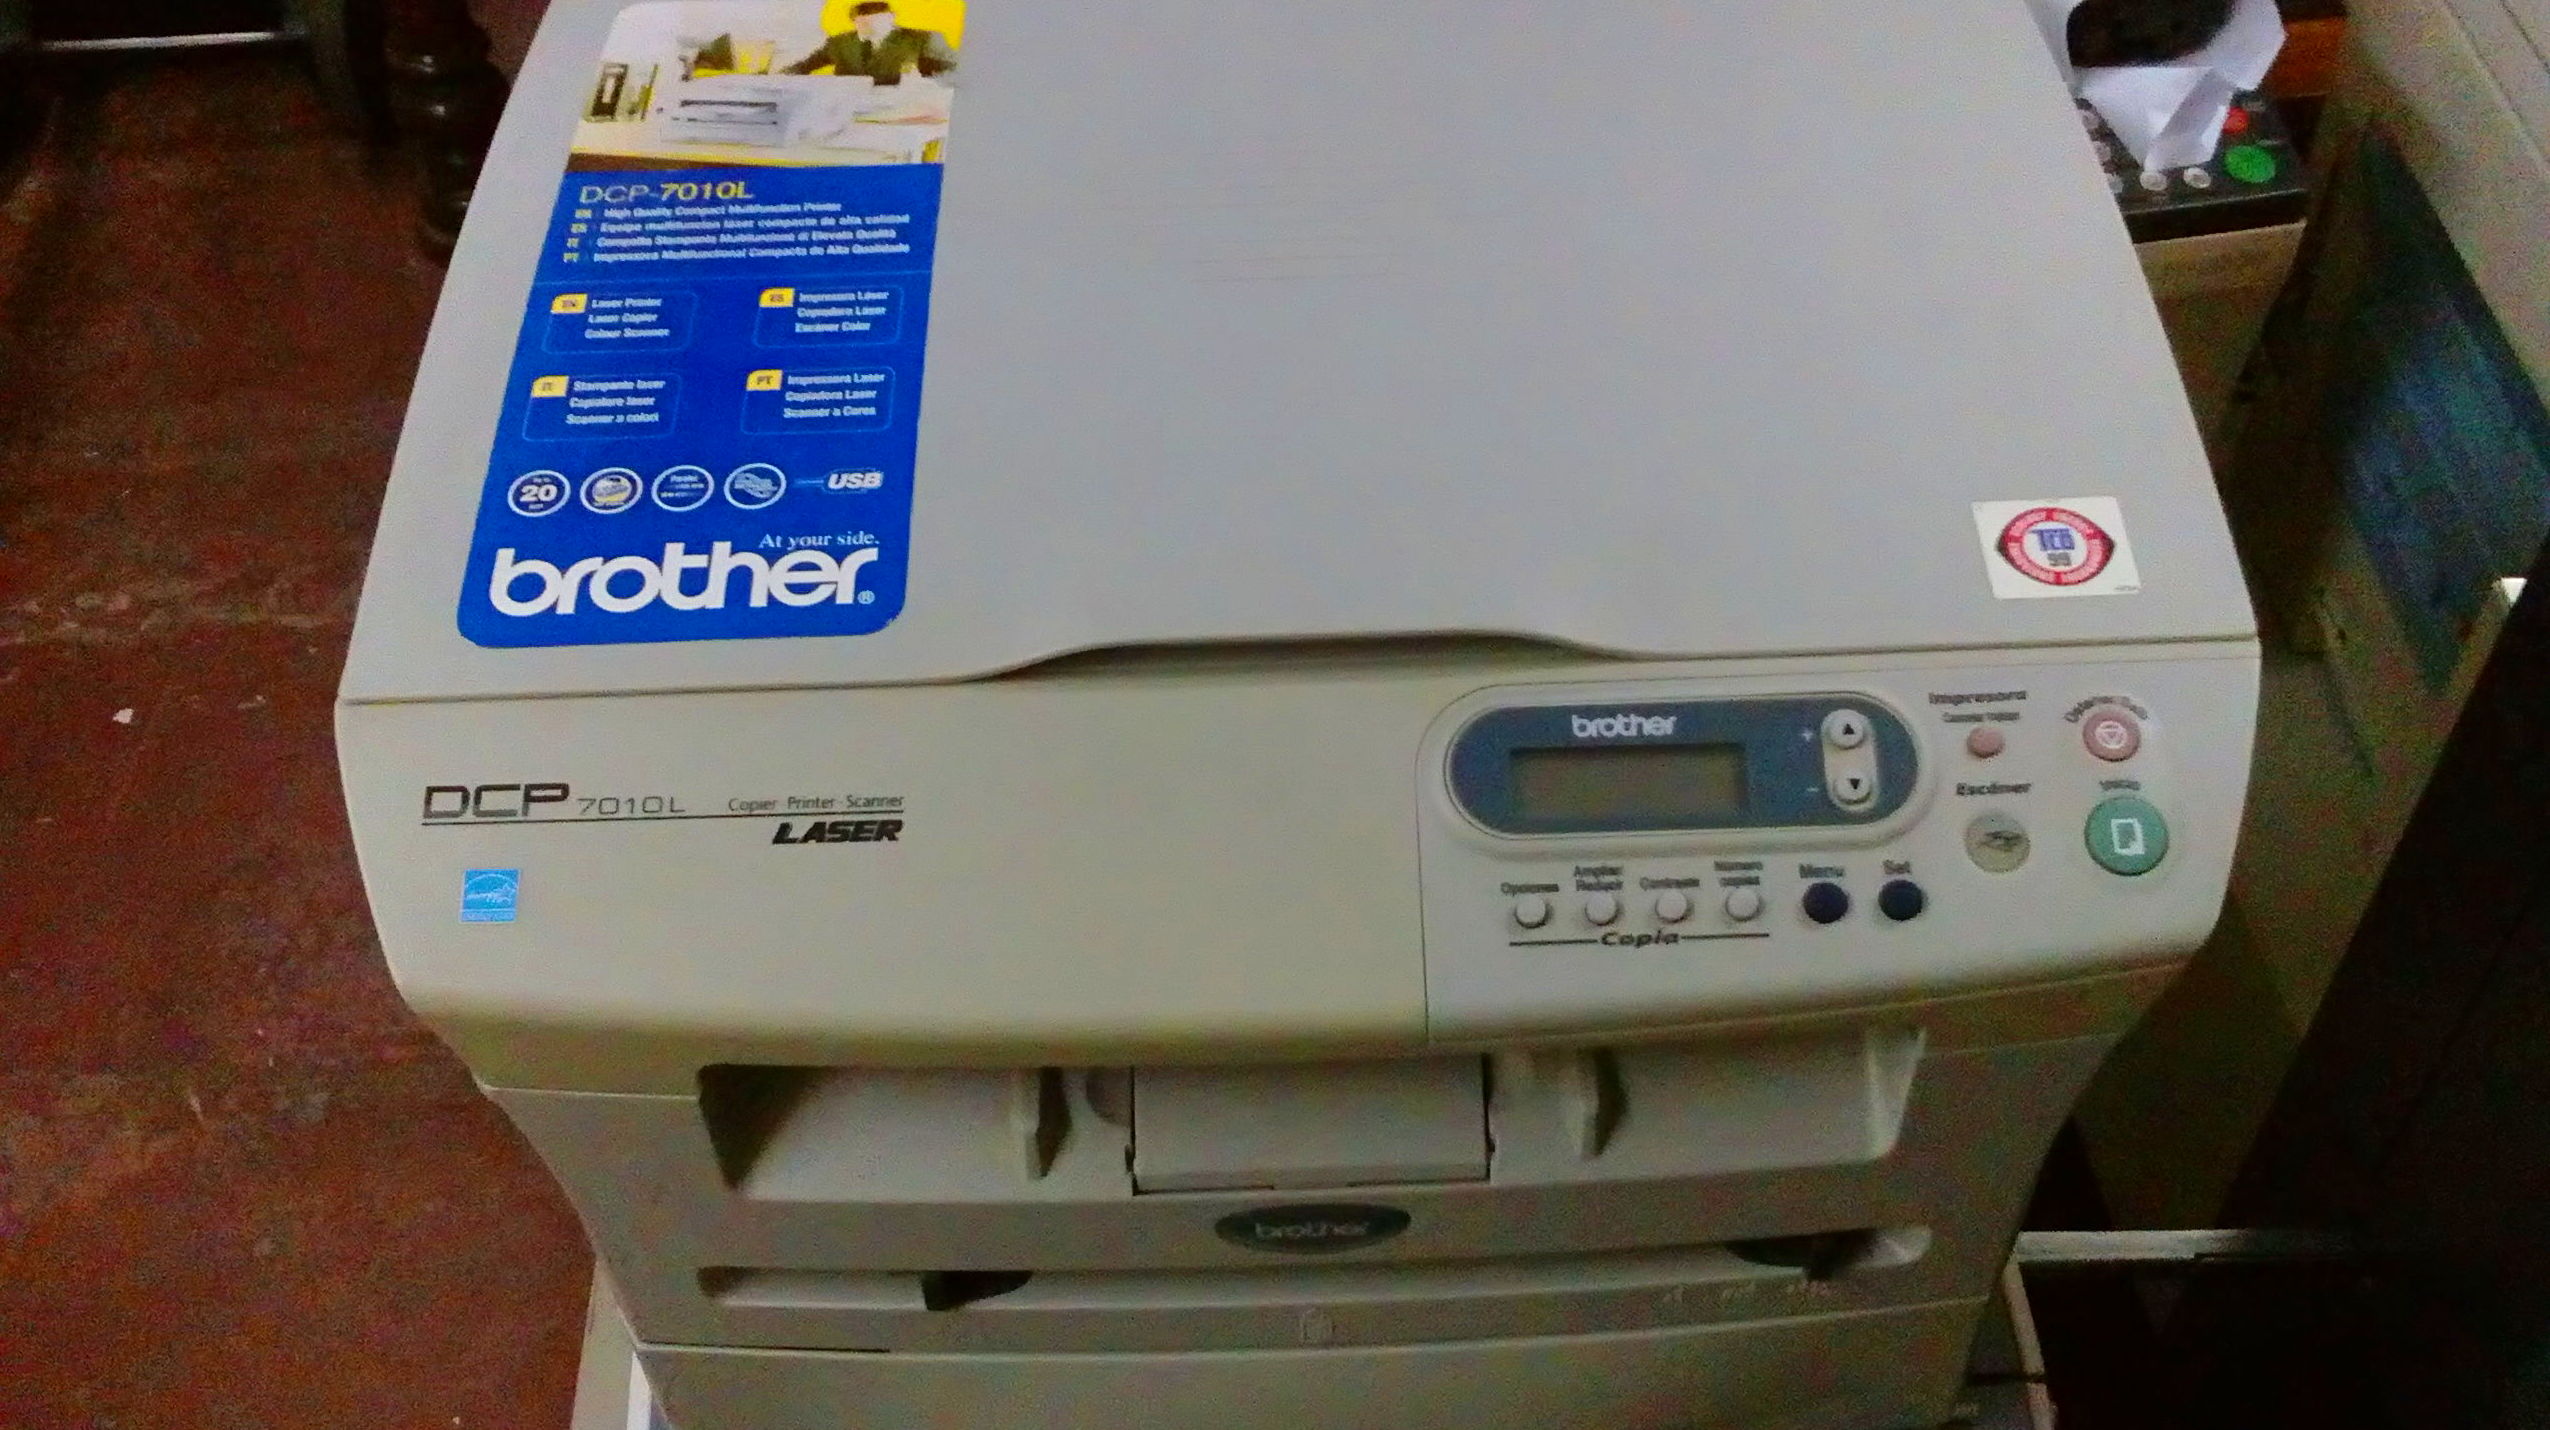 BROTHER DCP 7010L